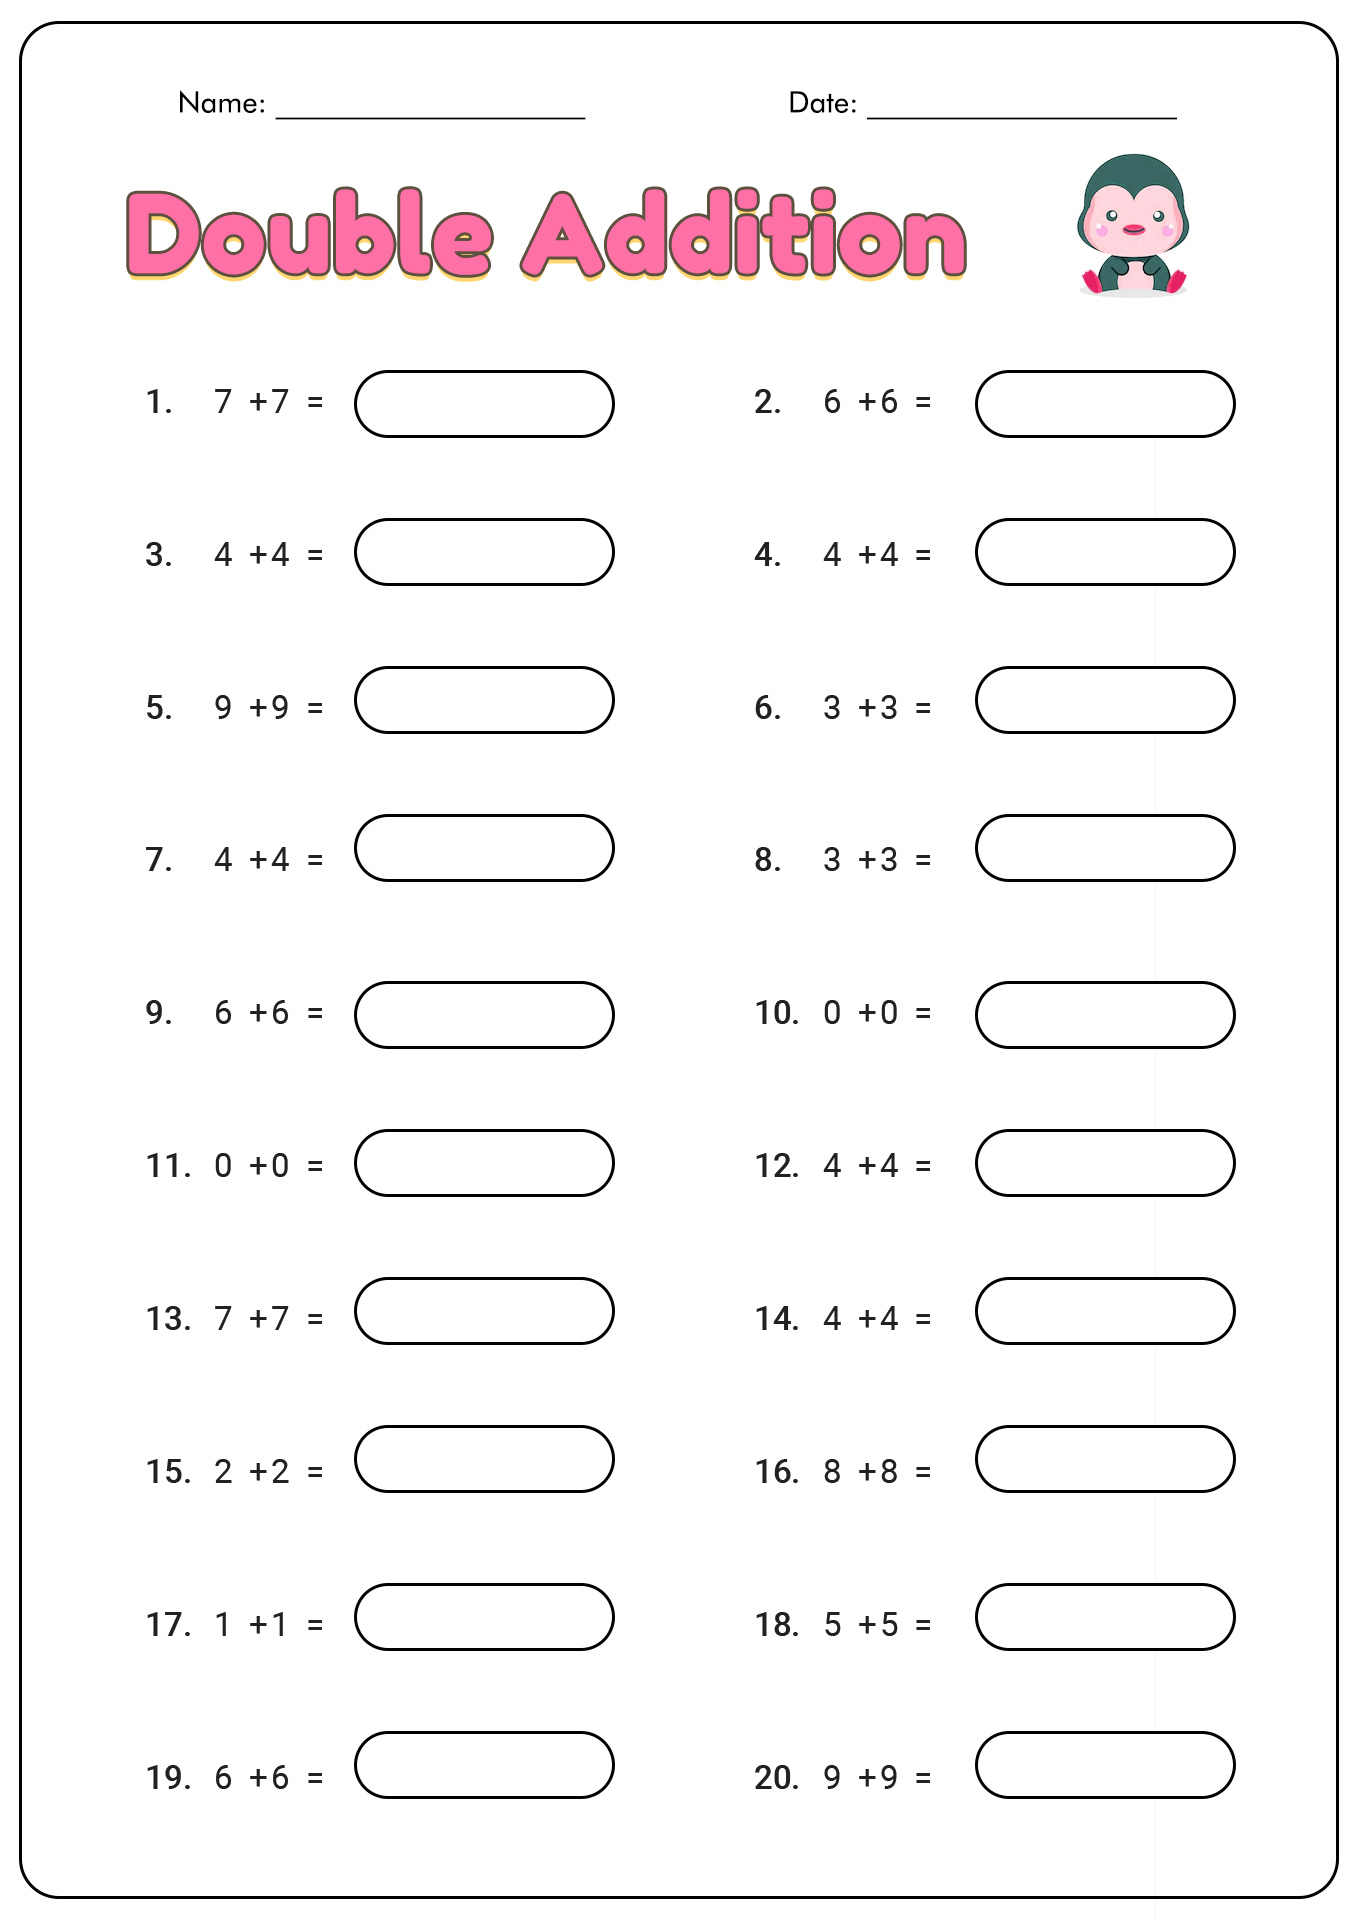 free-printable-doubles-worksheets-printable-templates